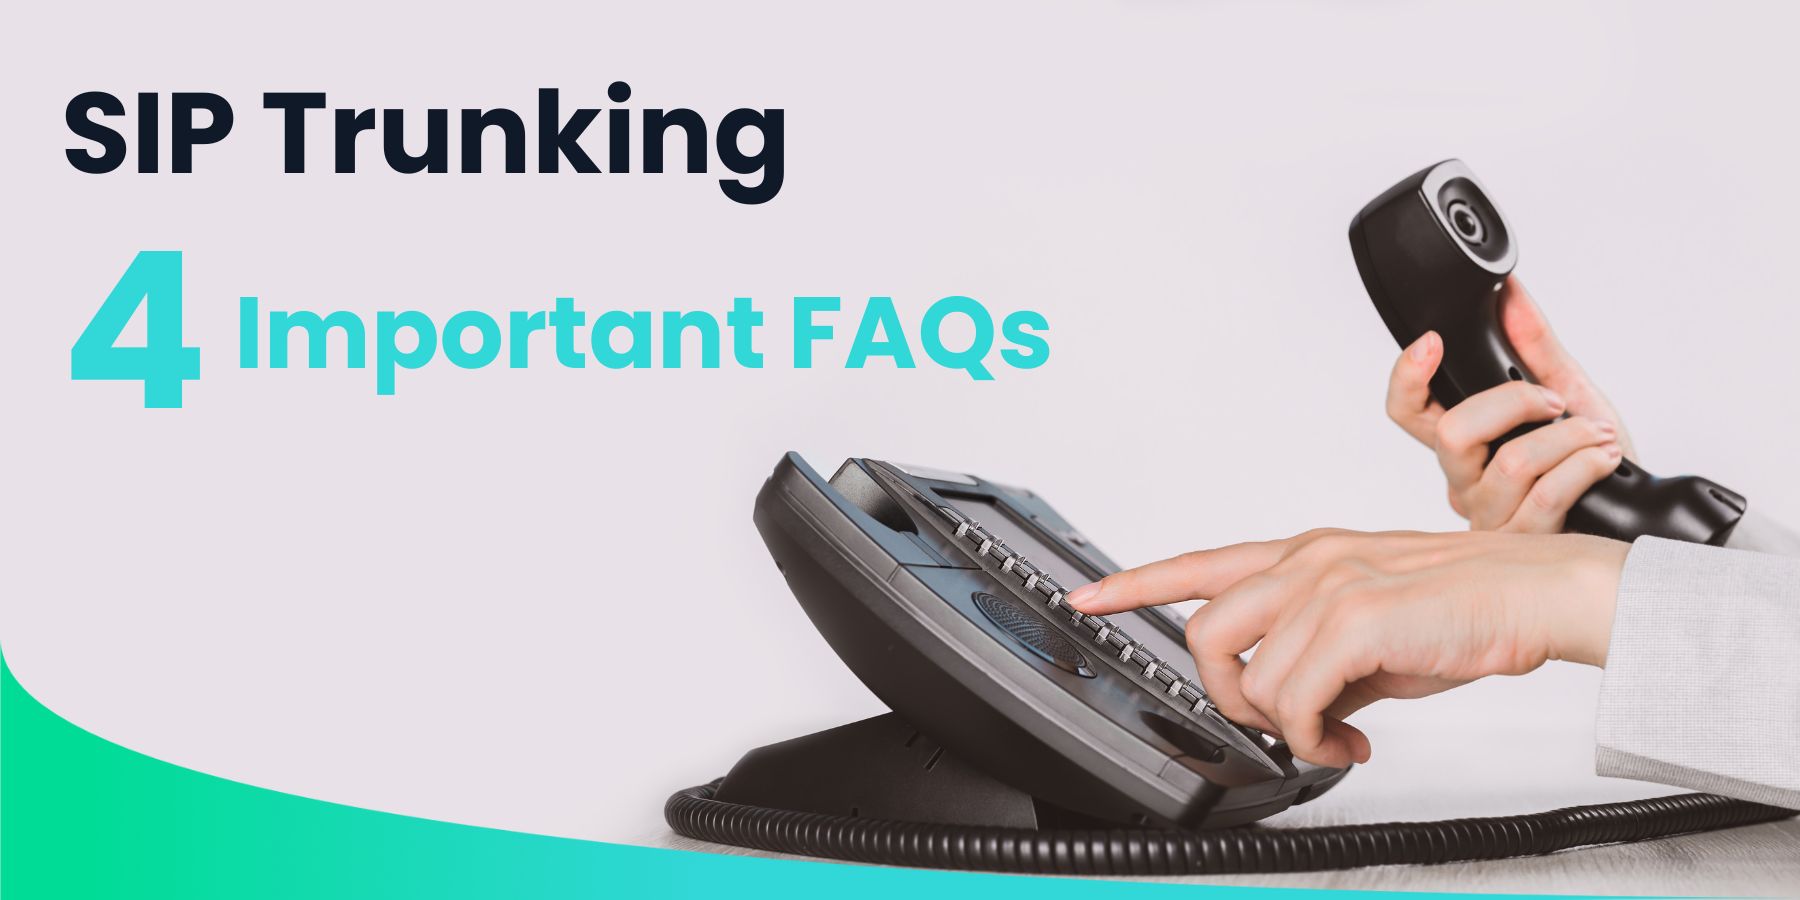 Featured image for “SIP Trunking – 4 Important FAQs”